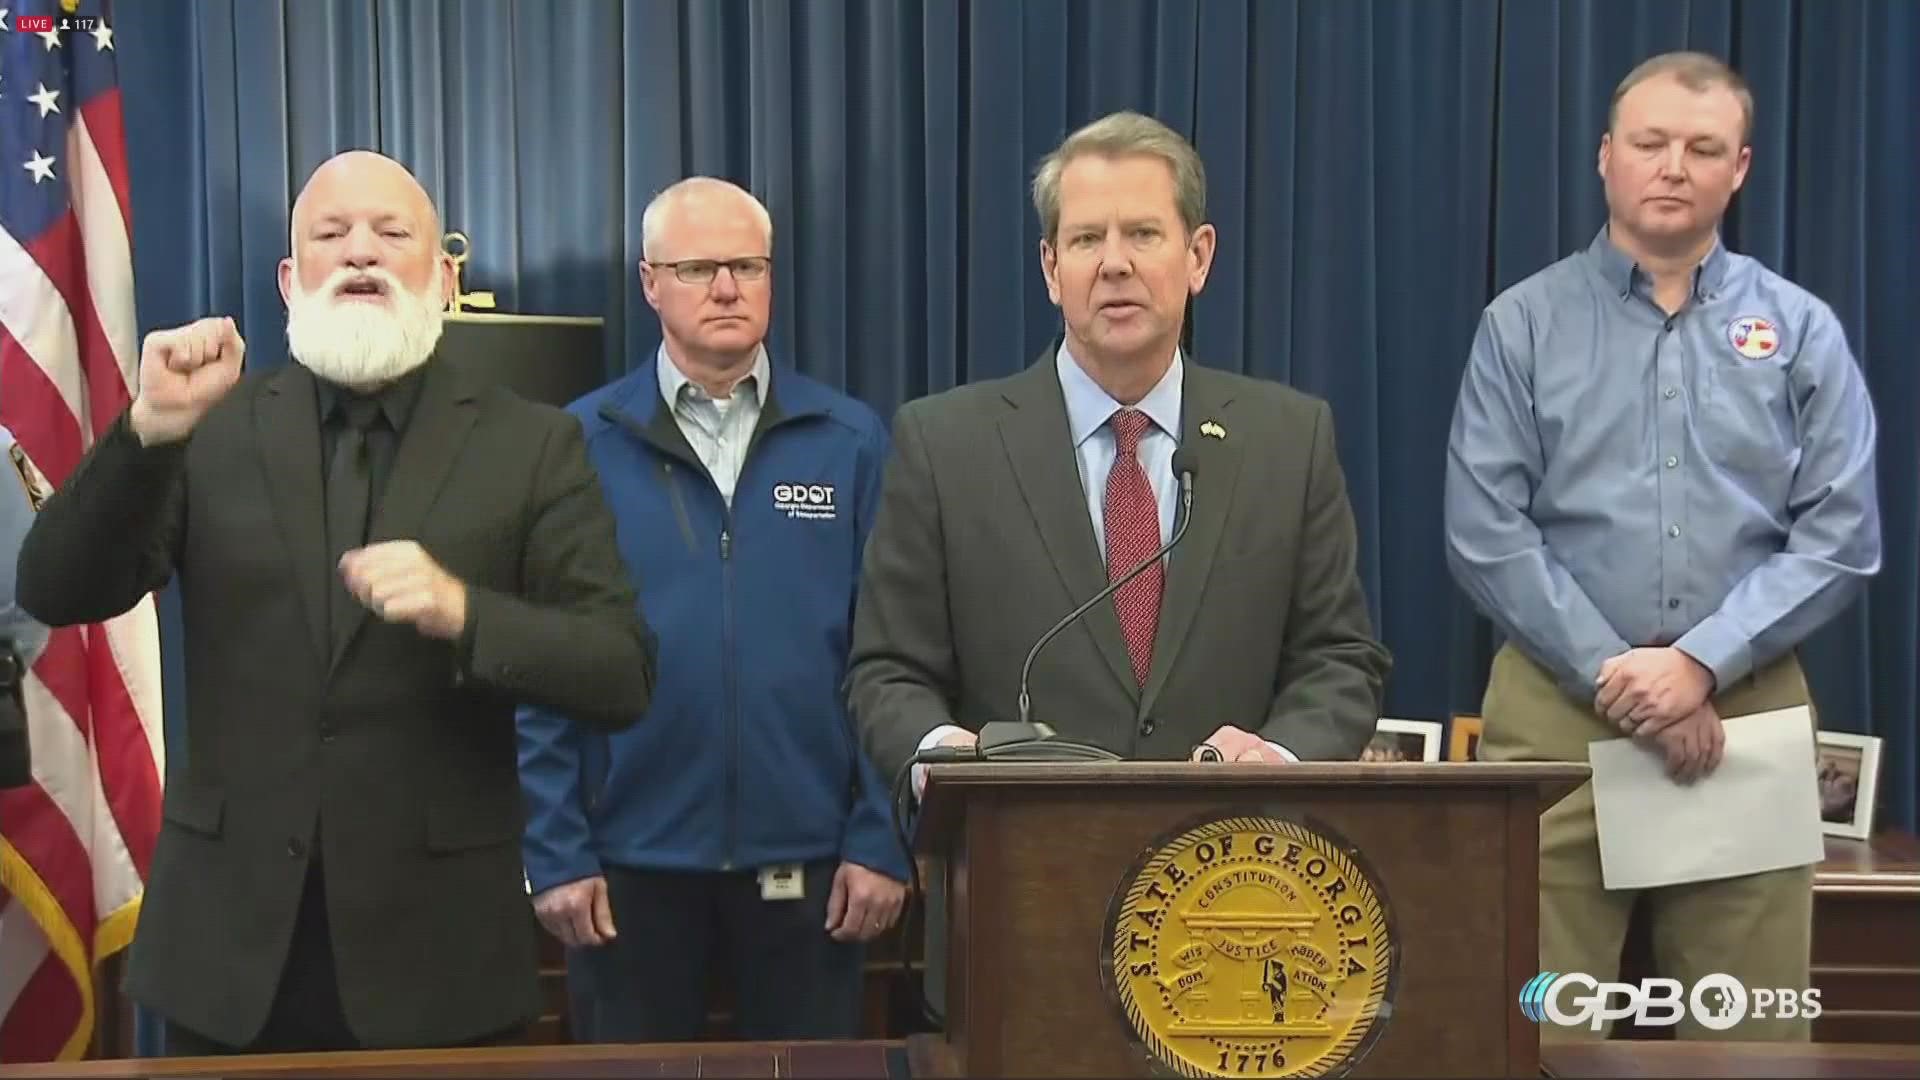 Gov. Brian Kemp and other officials spoke Friday ahead of Sunday's expected winter weather in north Georgia.